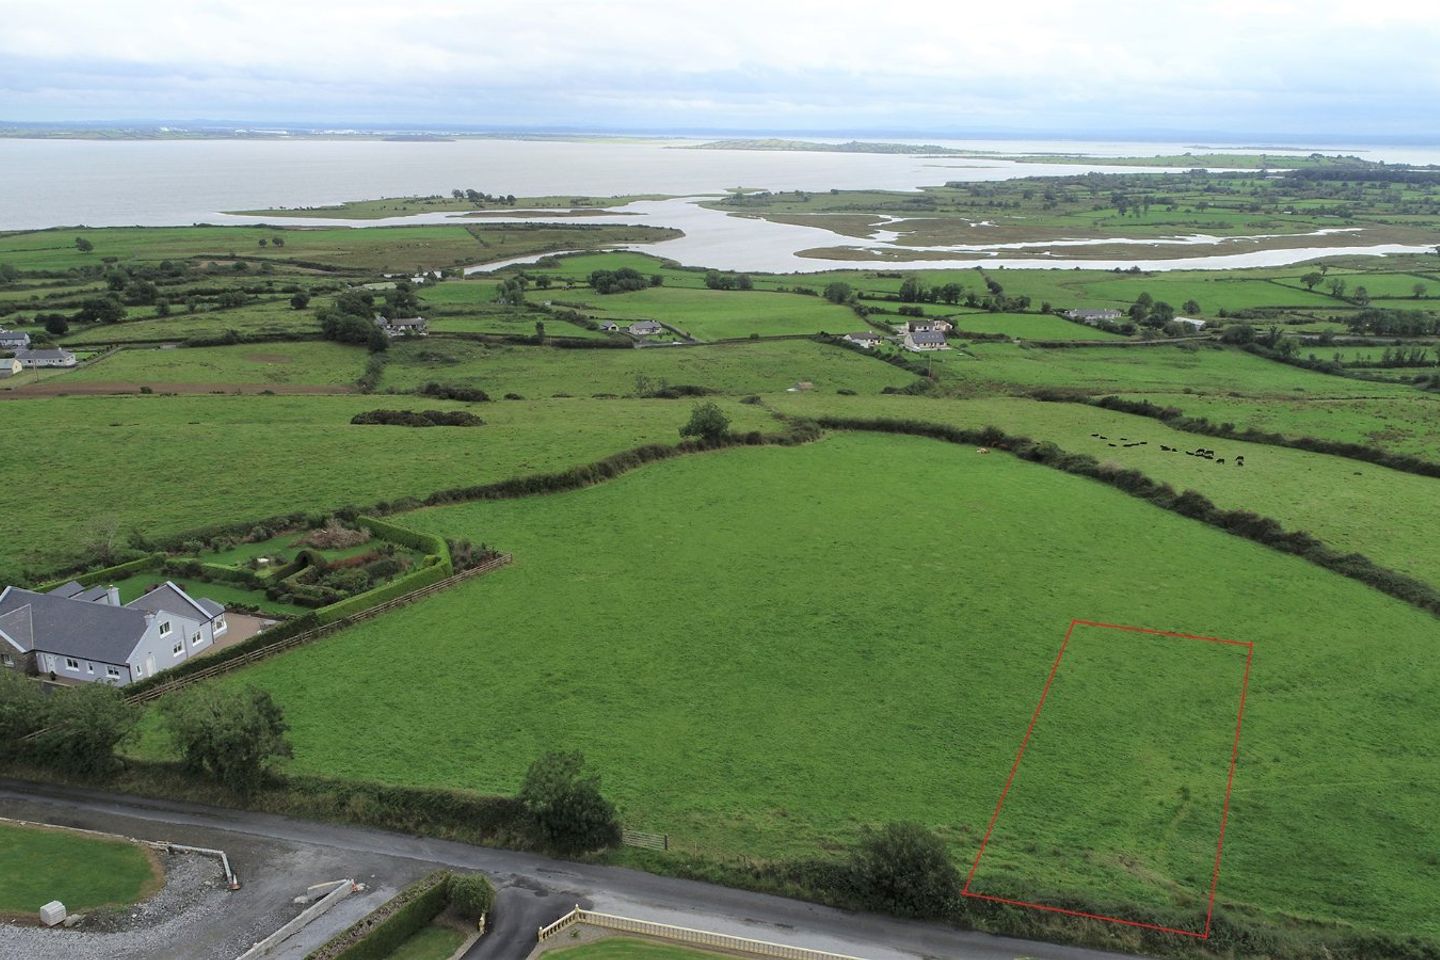 0.5 Acre Site At Lisheen, Ballynacally, Co. Clare